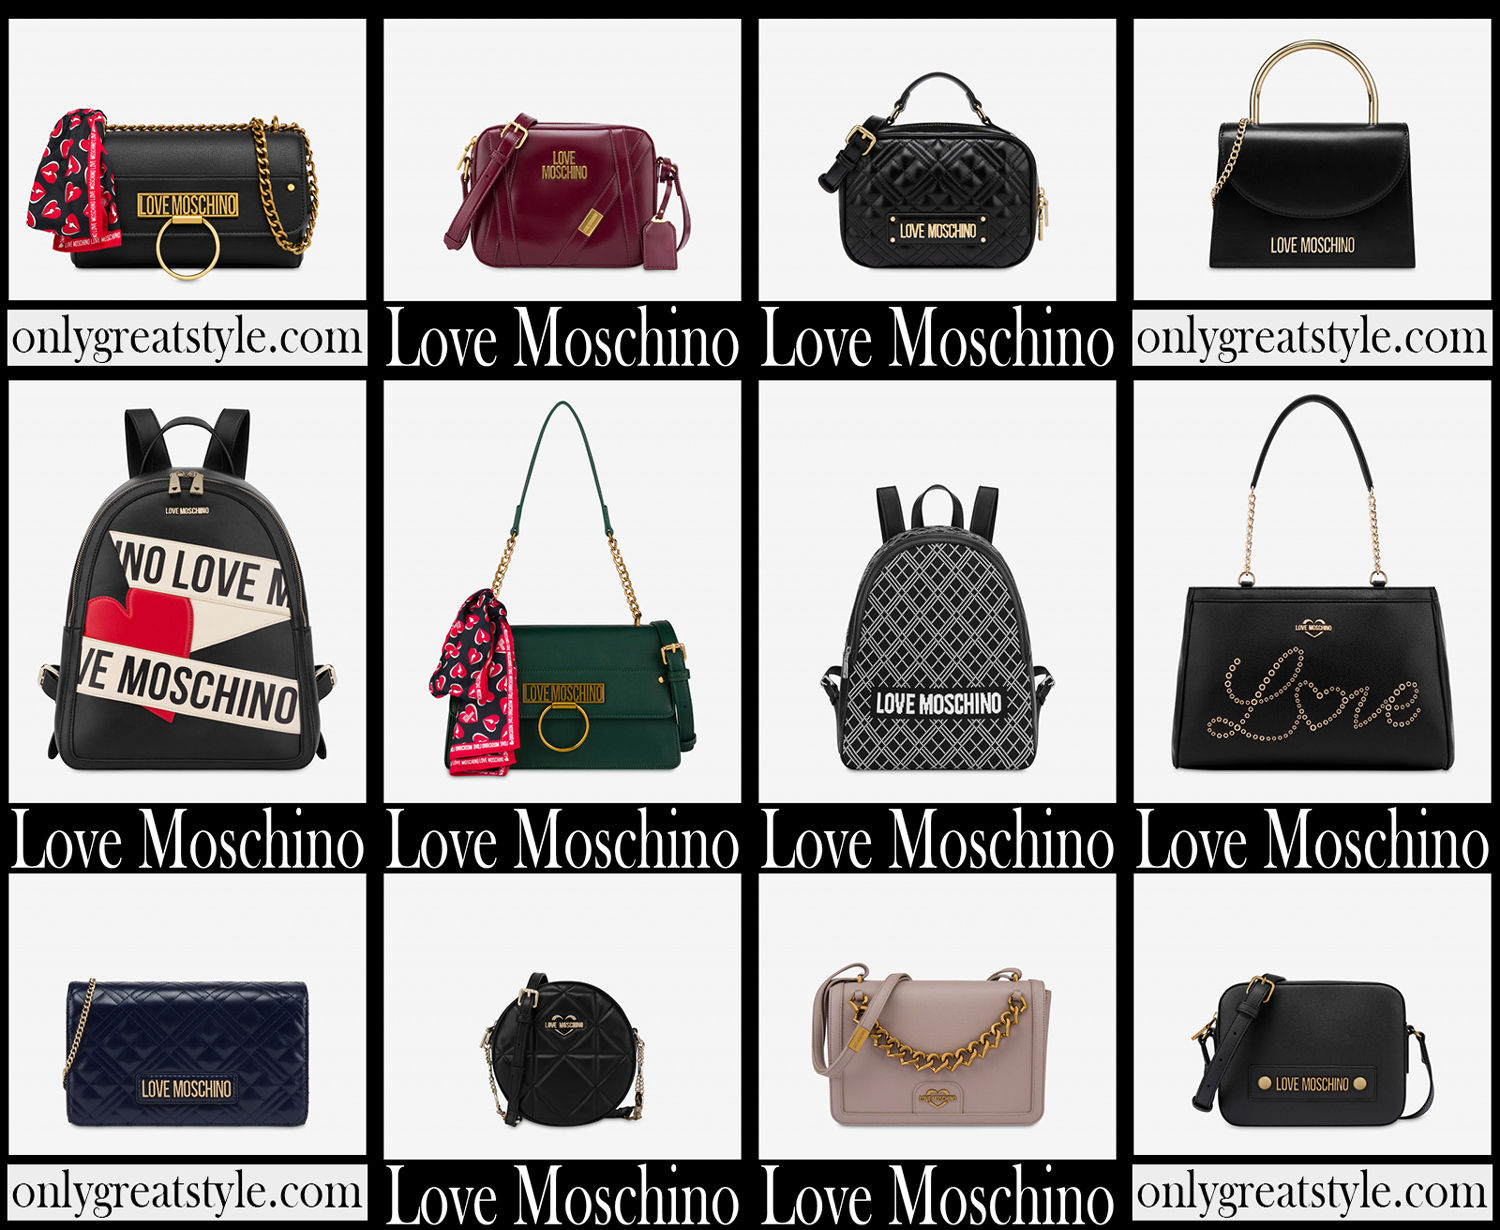 Love Moschino bags 2021 new arrivals 